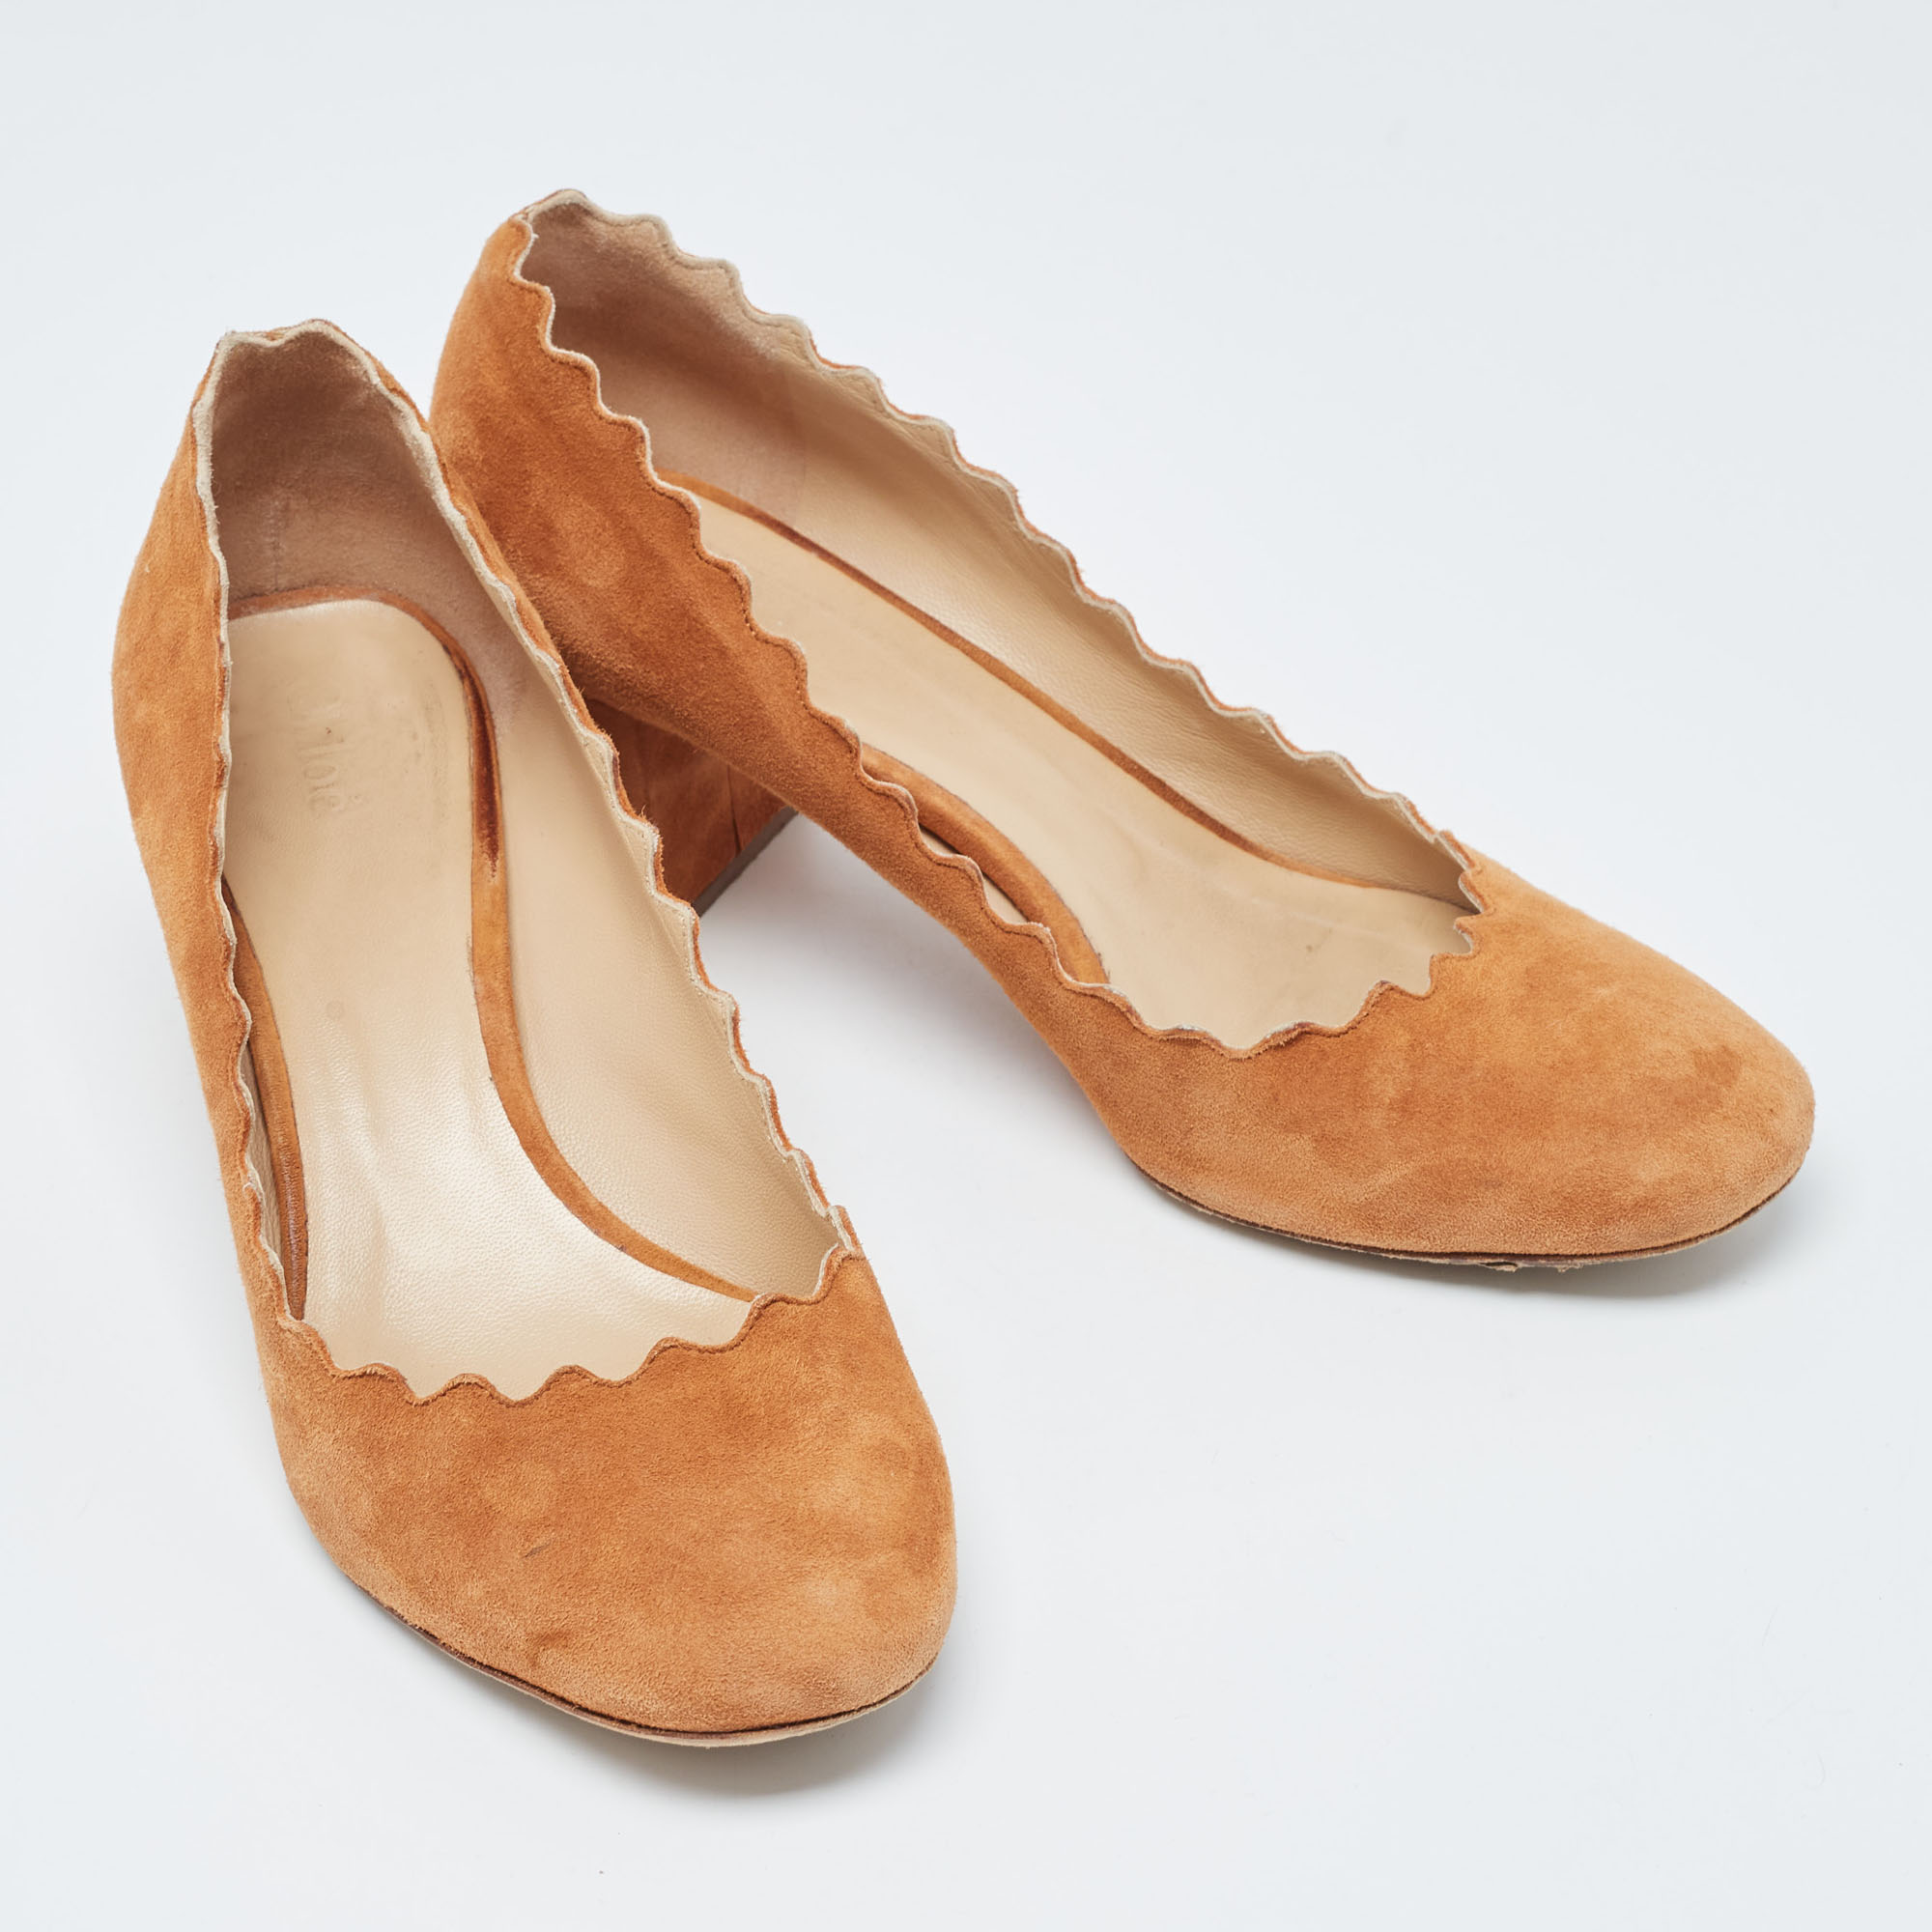 Chloe Brown Suede Laurena Scalloped Pumps Size 37